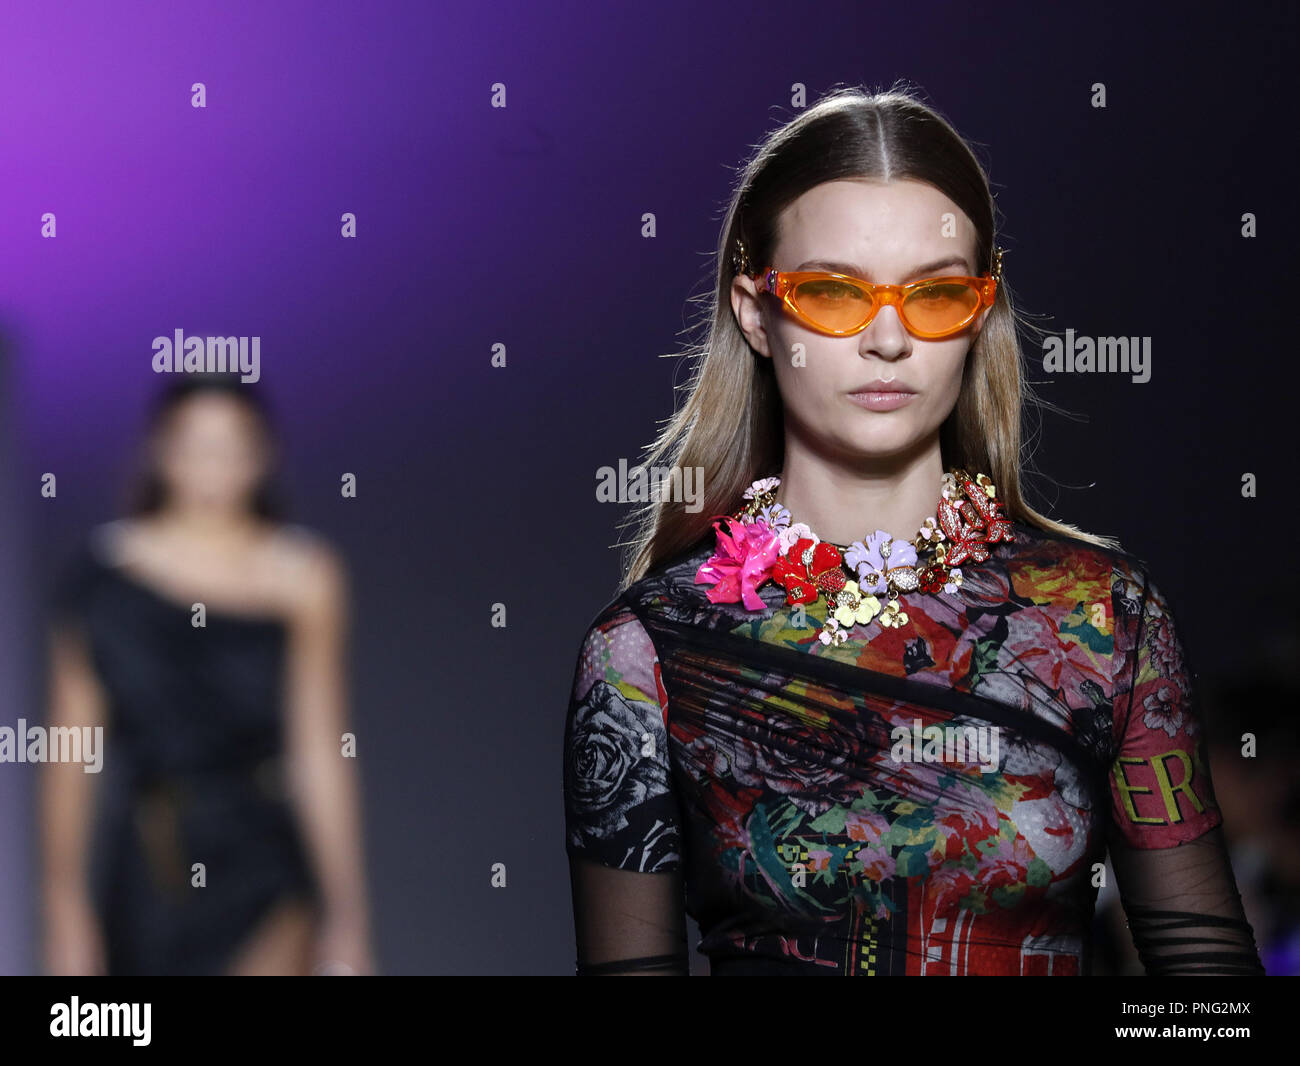 Sora Choi walks on the runway during the Versace Fashion show during Milan  Fashion Week Spring Summer 2019 held in Milan, Italy on September 22, 2018.  (Photo by Jonas Gustavsson/Sipa USA Stock